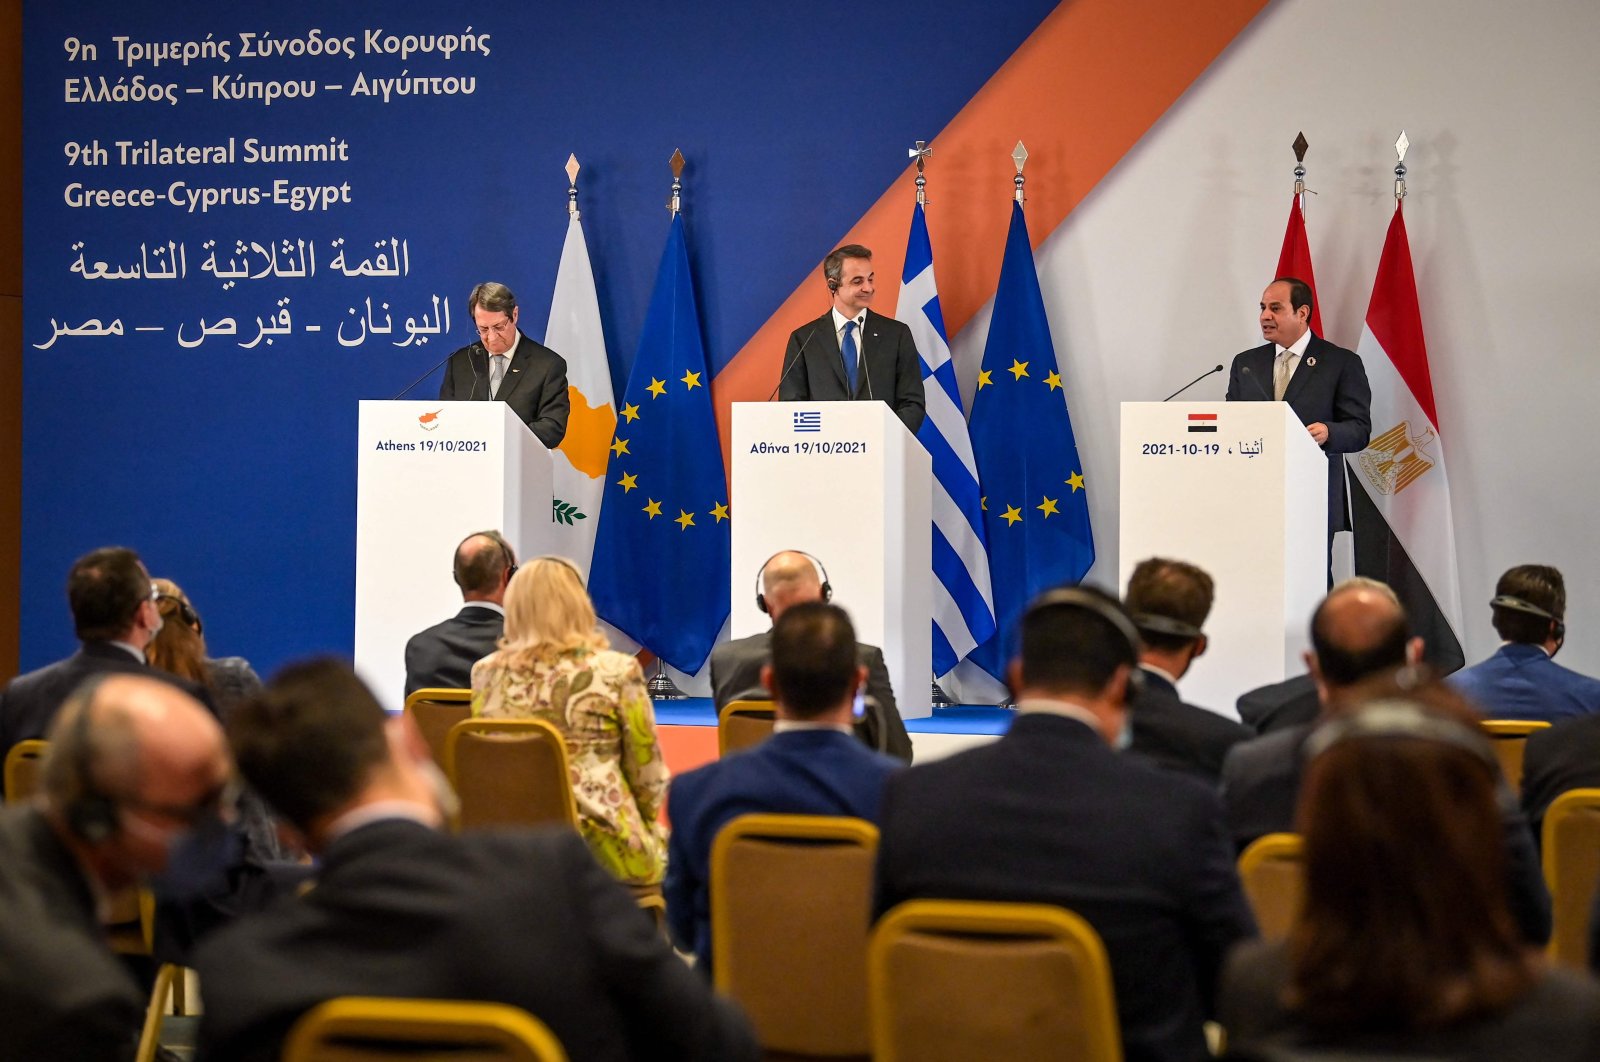 Greece's Prime Minister Kyriakos Mitsotakis (C) speaks alongside Egypt's President Abdel-Fattah el-Sissi (R) and Greek Cypriot leader Nikos Anastasiades (L) after their trilateral meeting in Athens, Greece, Oct. 19, 2021. (AFP Photo)